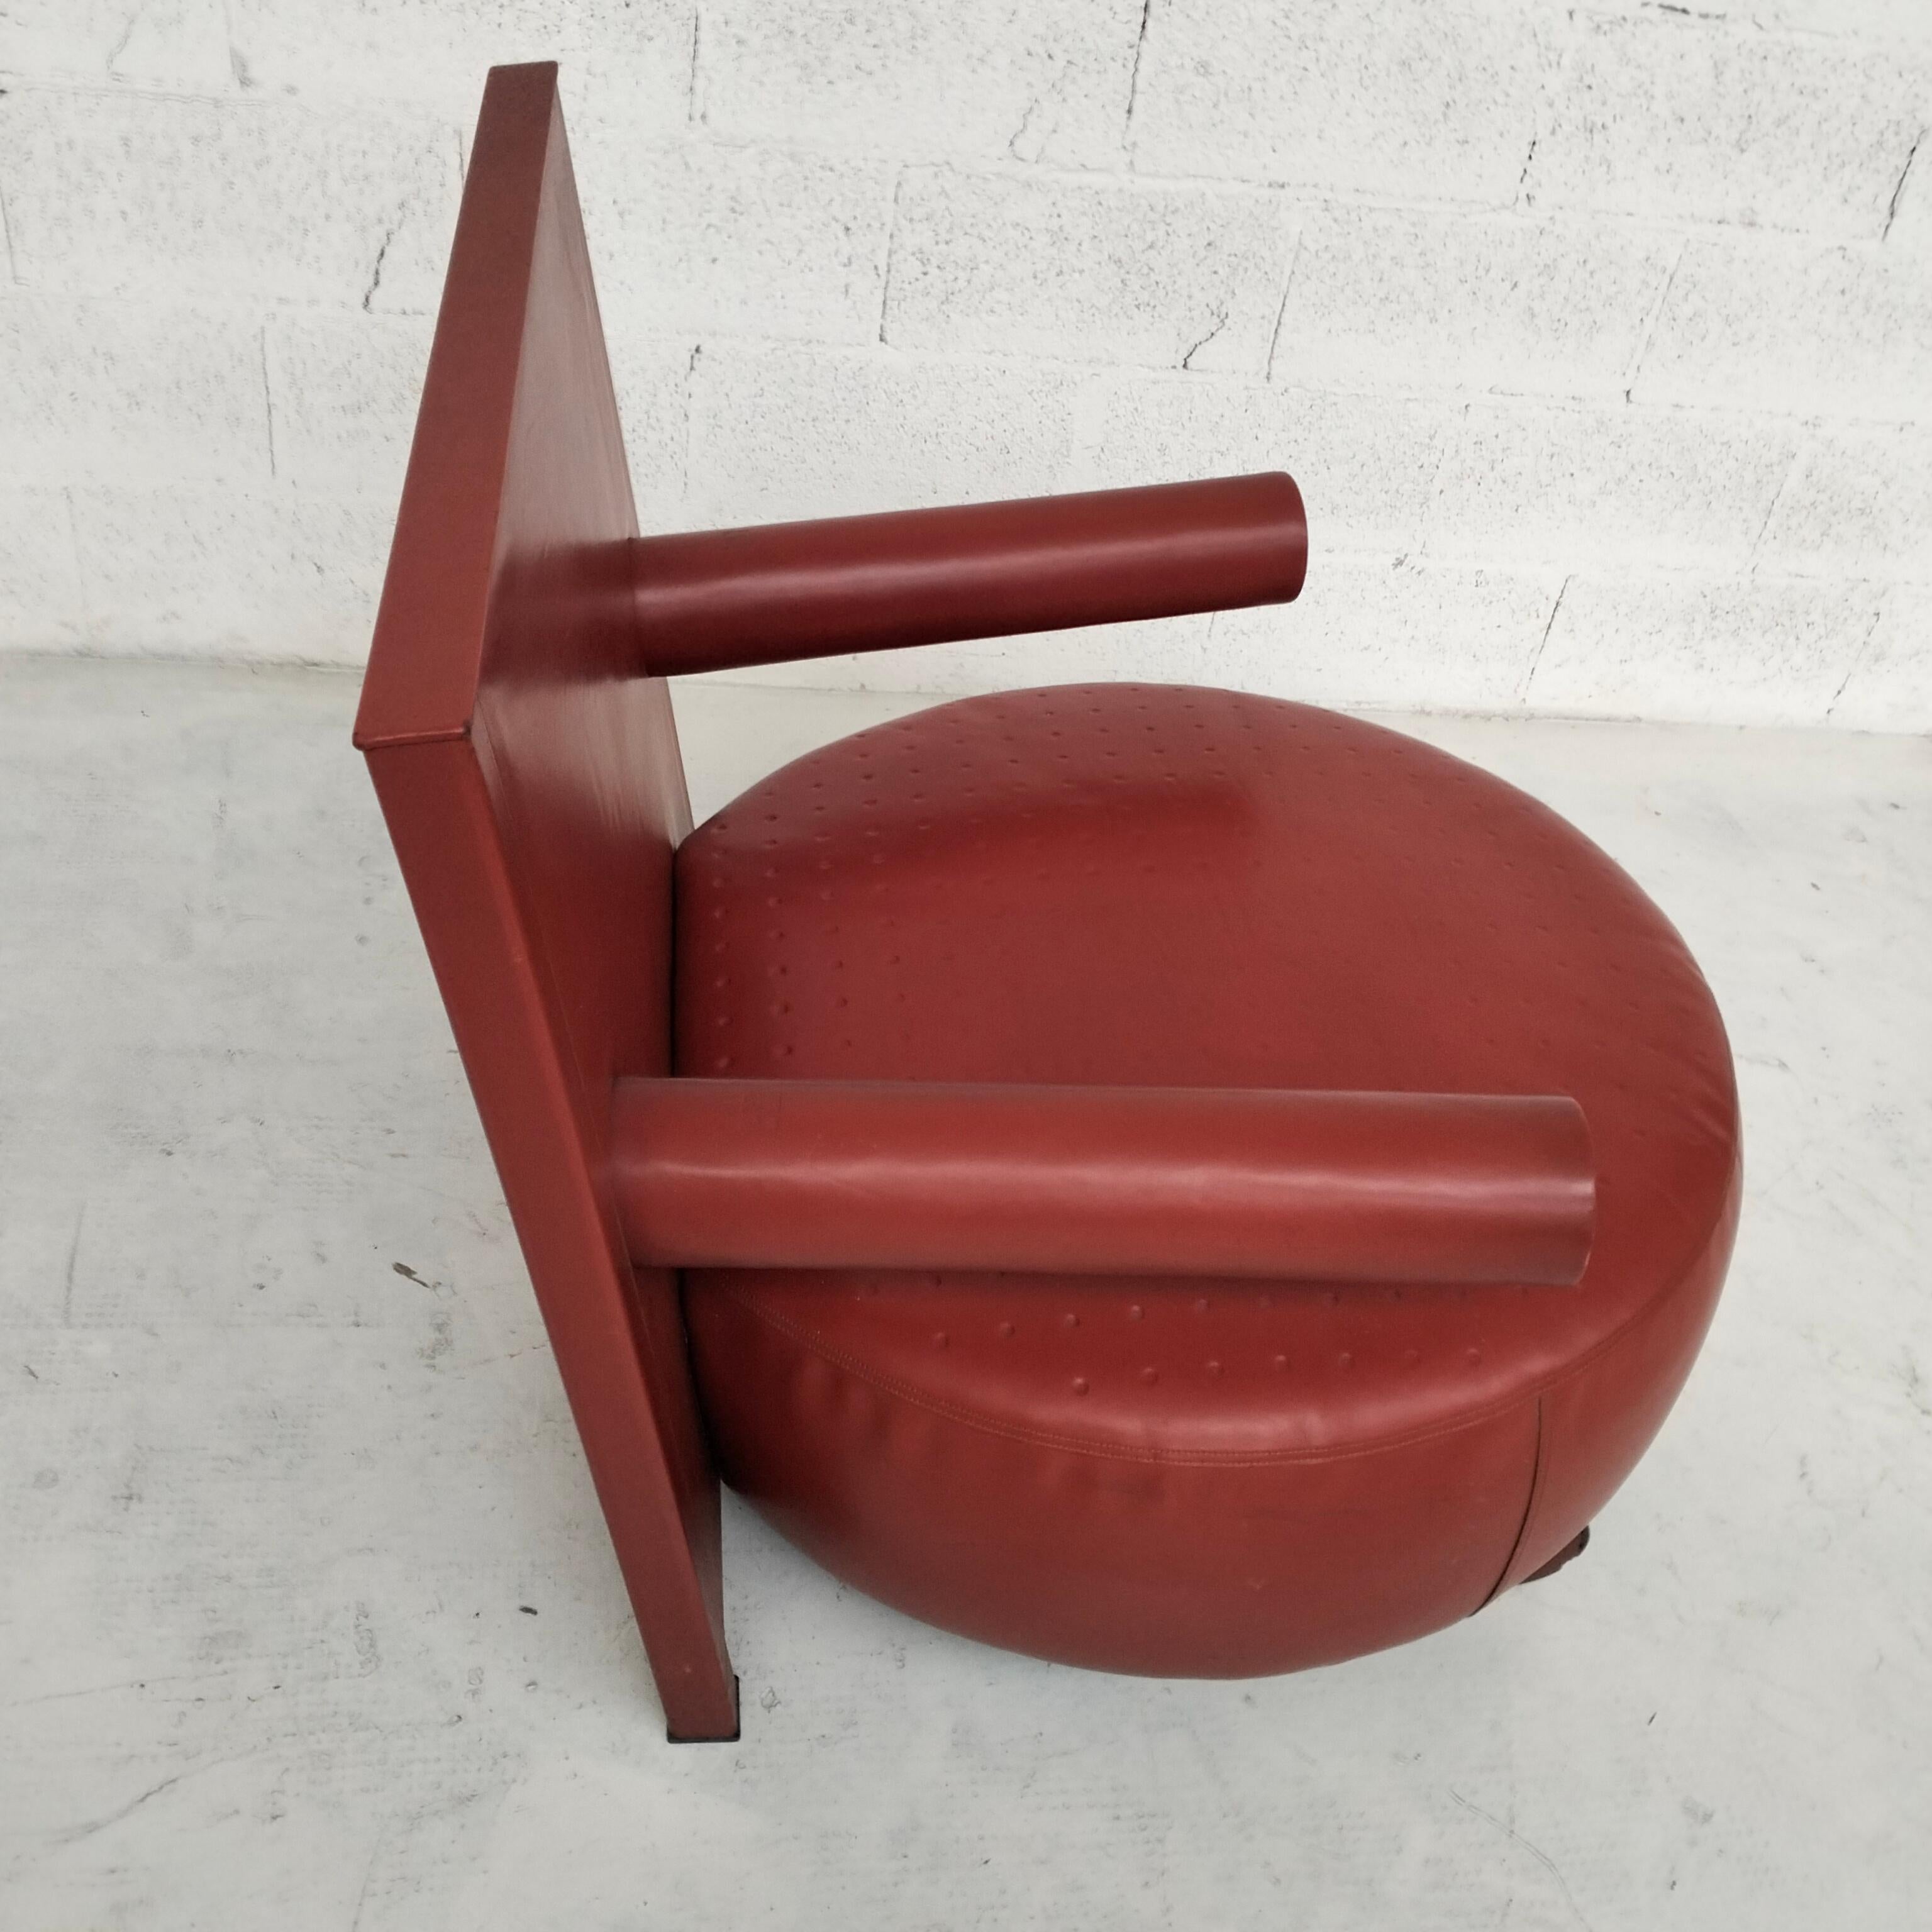 Baisity leather armchair by Antonio Citterio for B&B Italia - 1980’s For Sale 5